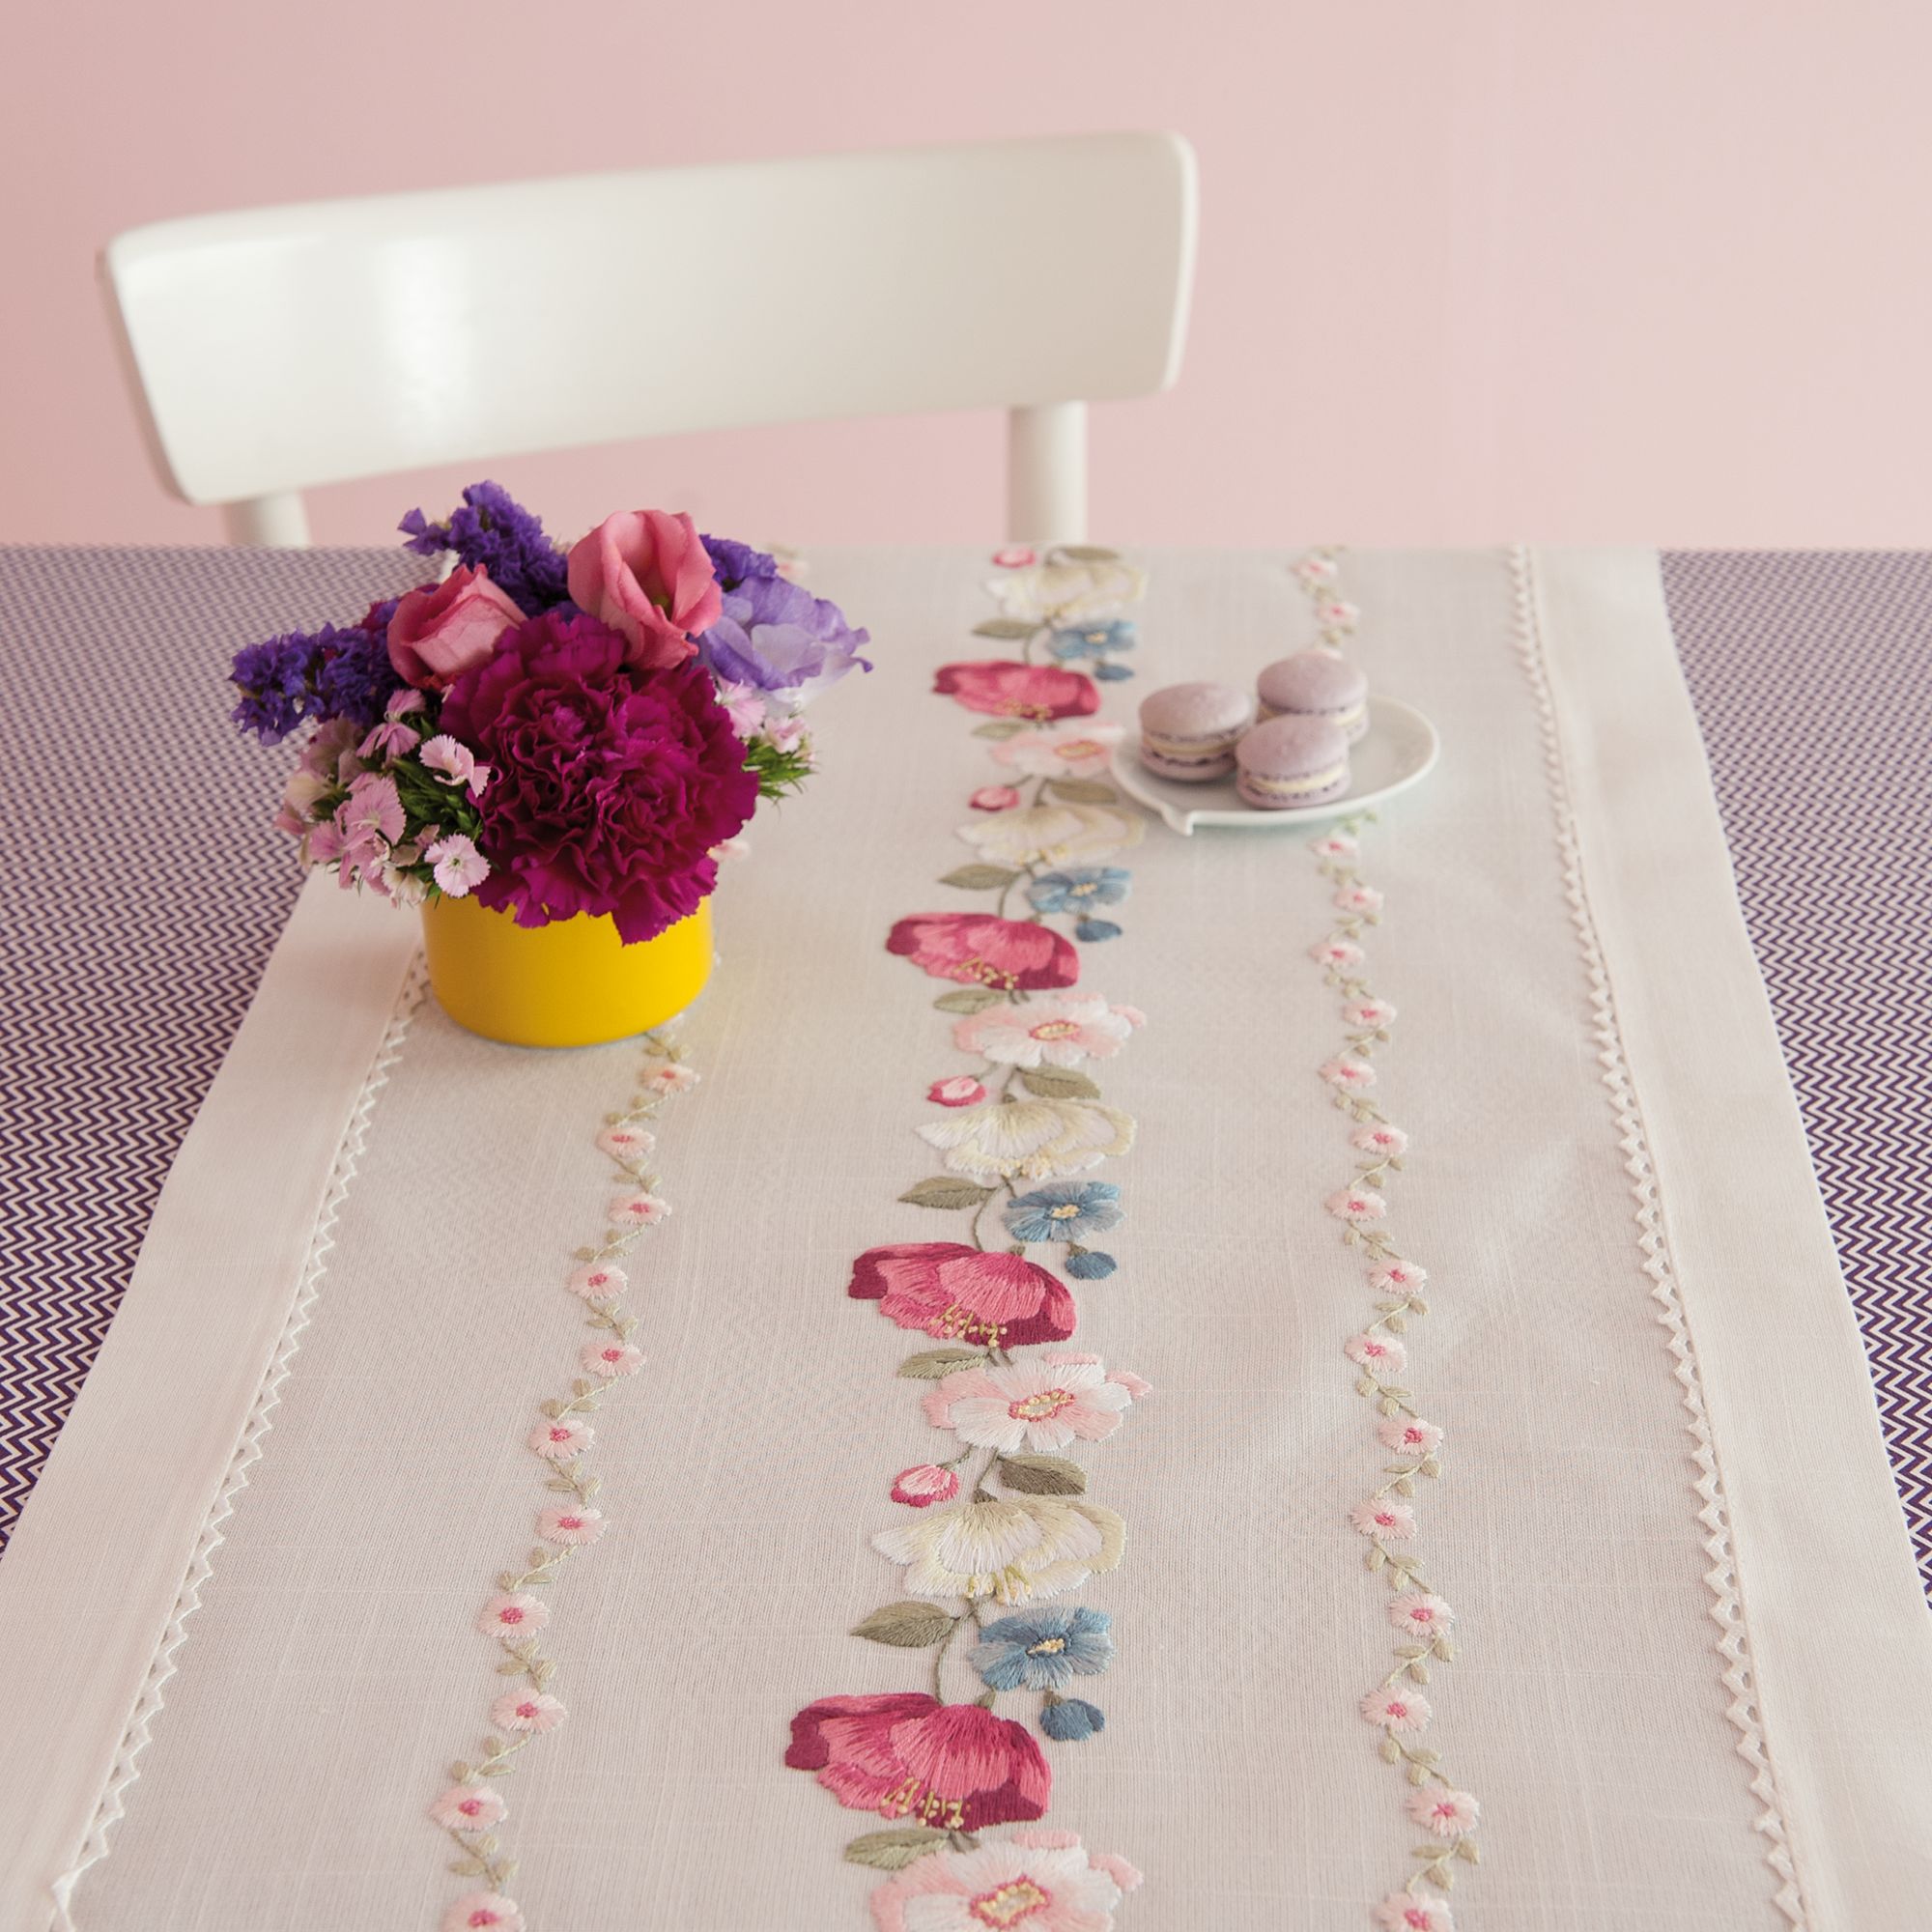 where can i buy table runners